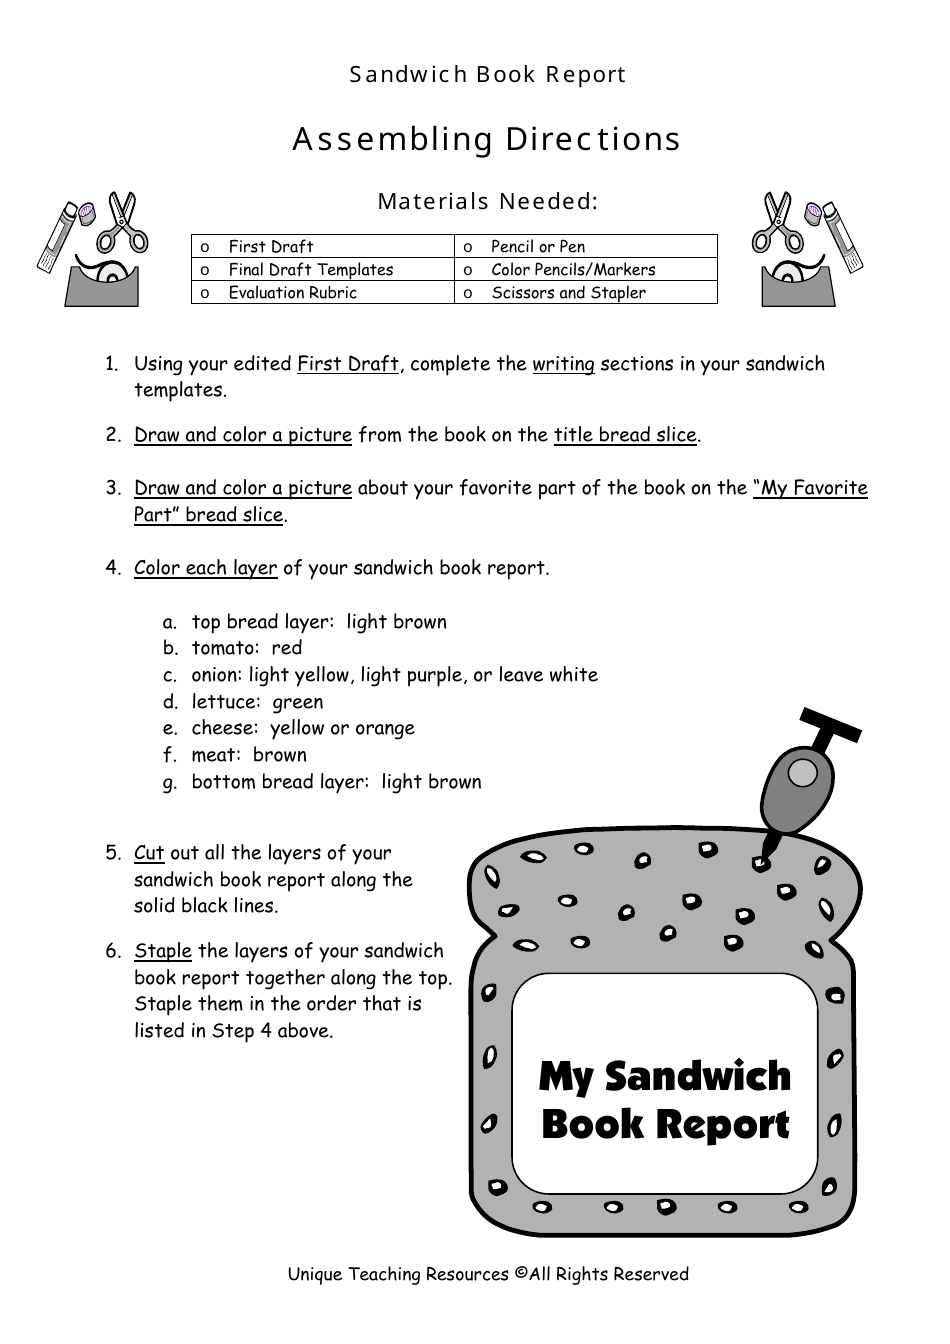 Sandwich Book Report Template - Unique Teaching Resources, Page 1